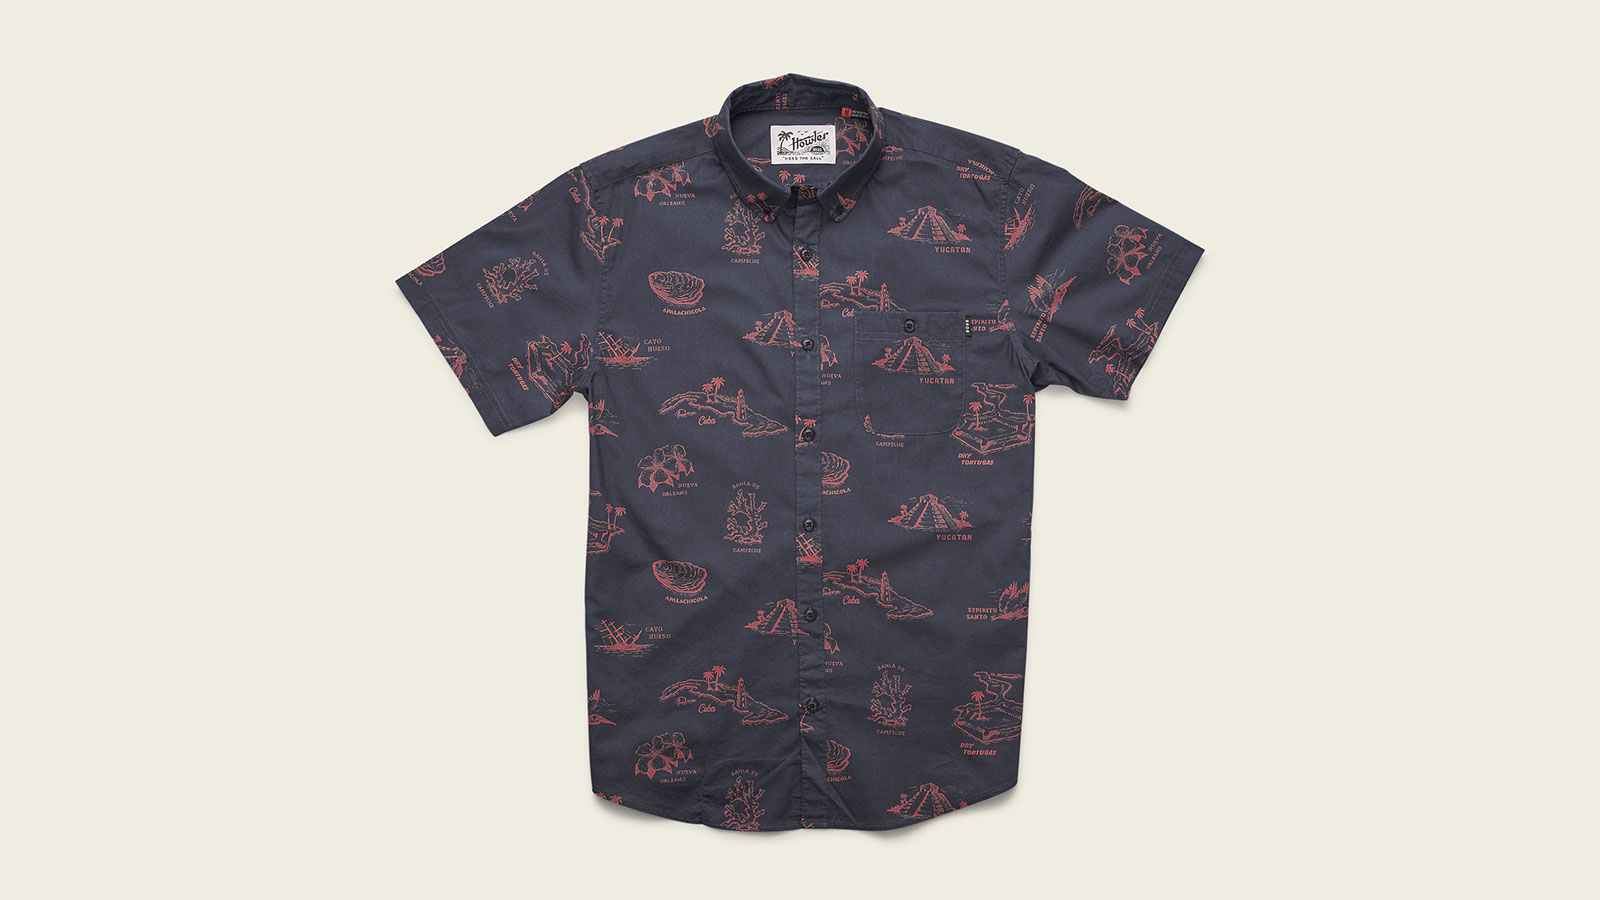 Howler Brothers Mansfield Shirt